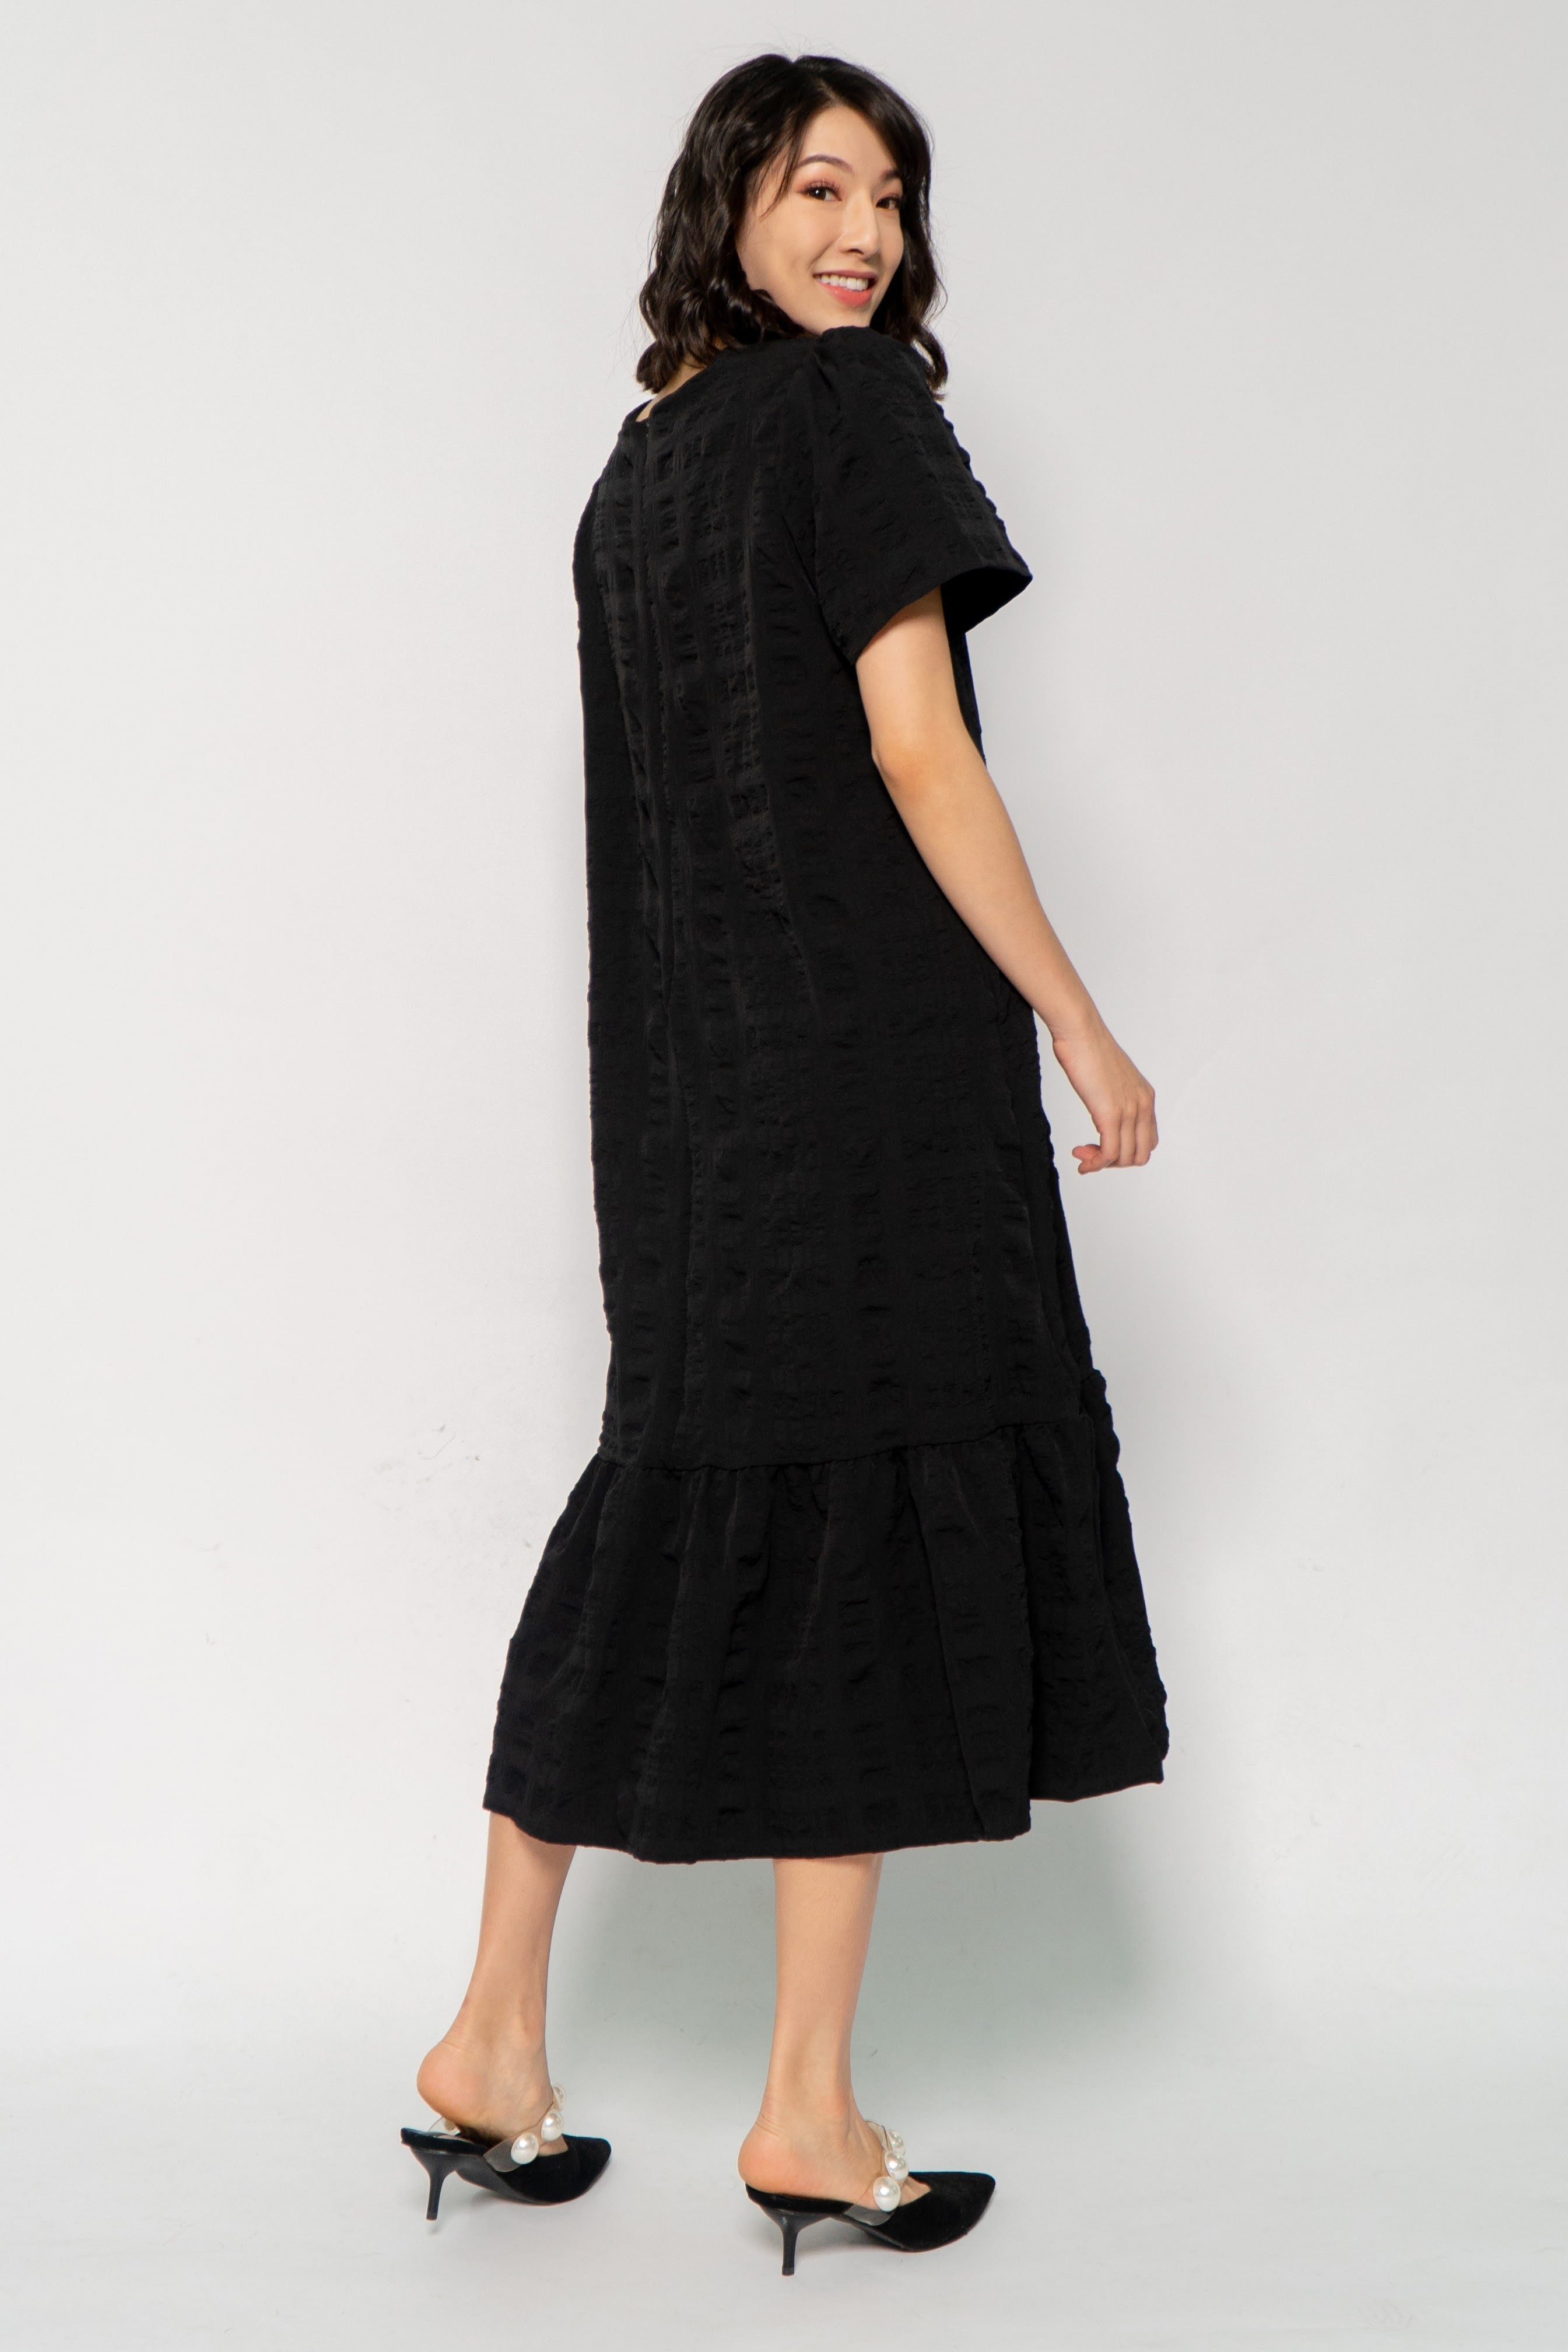 Xing Textured Dress in Black